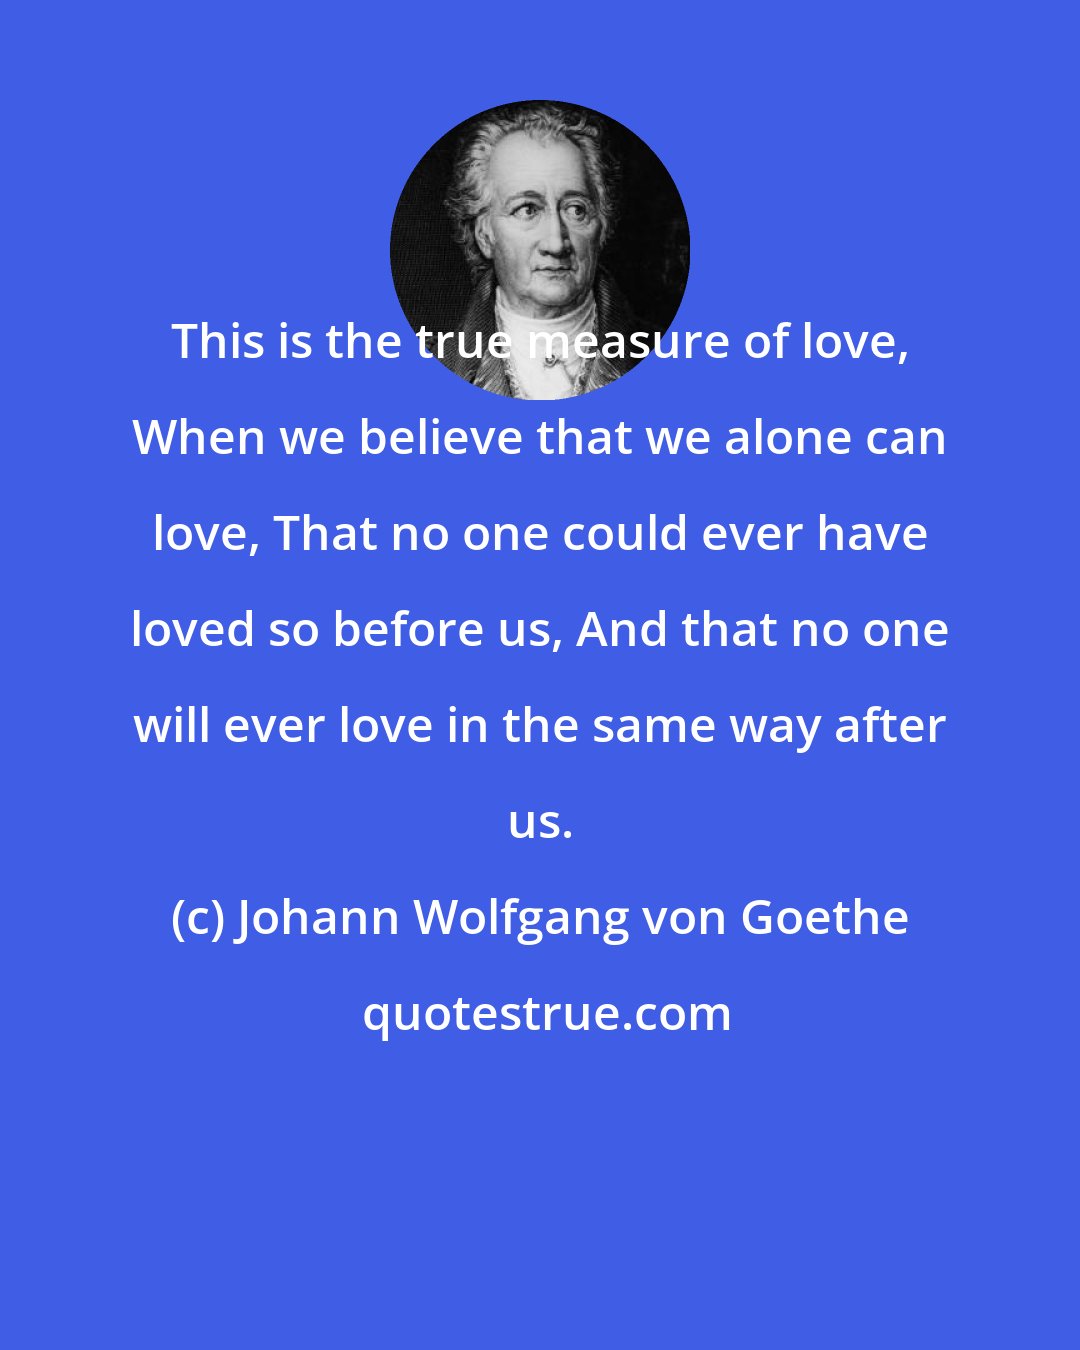 Johann Wolfgang von Goethe: This is the true measure of love, When we believe that we alone can love, That no one could ever have loved so before us, And that no one will ever love in the same way after us.